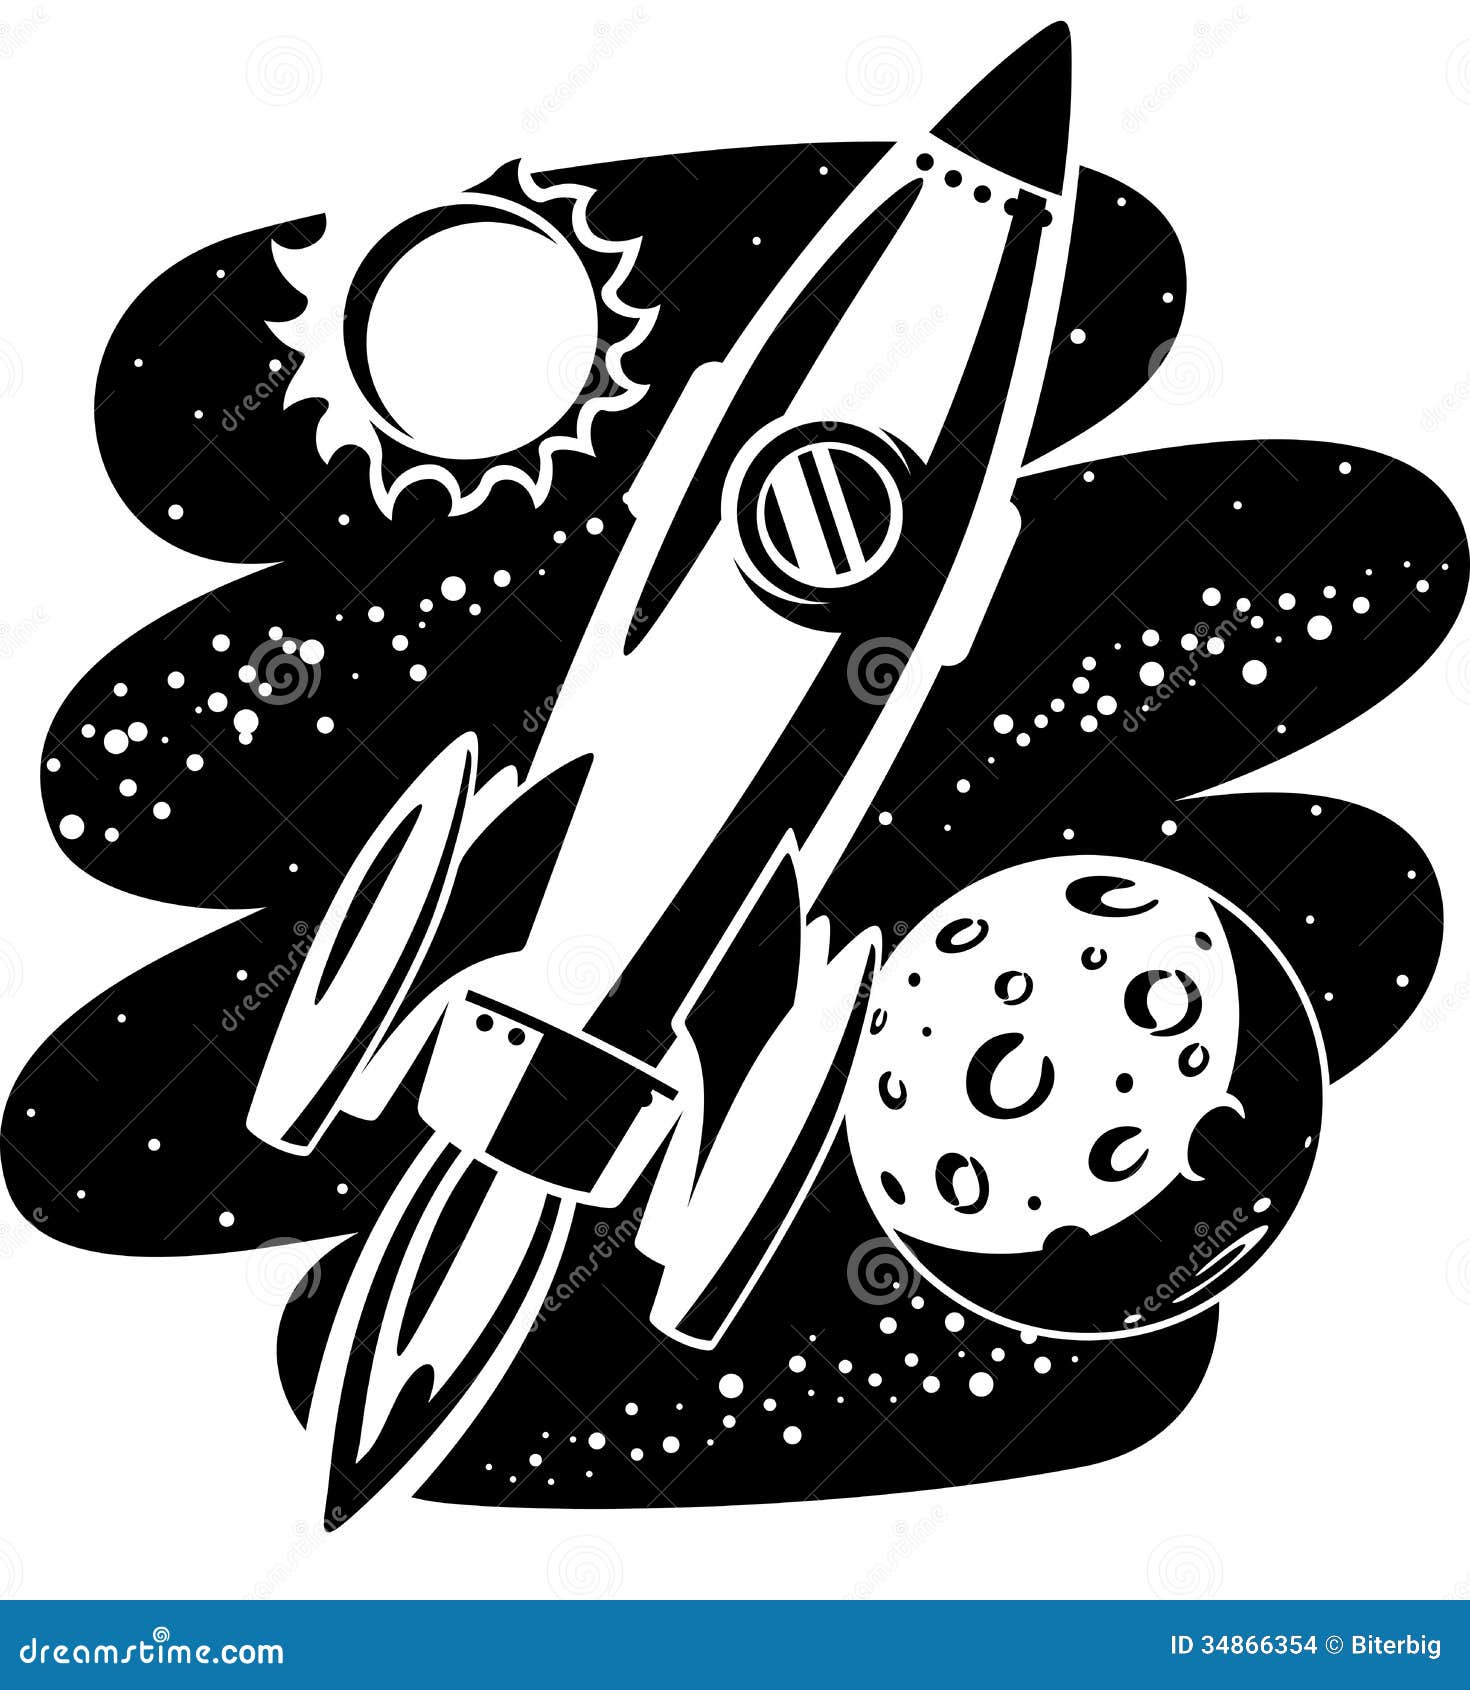 space travel clipart - photo #9